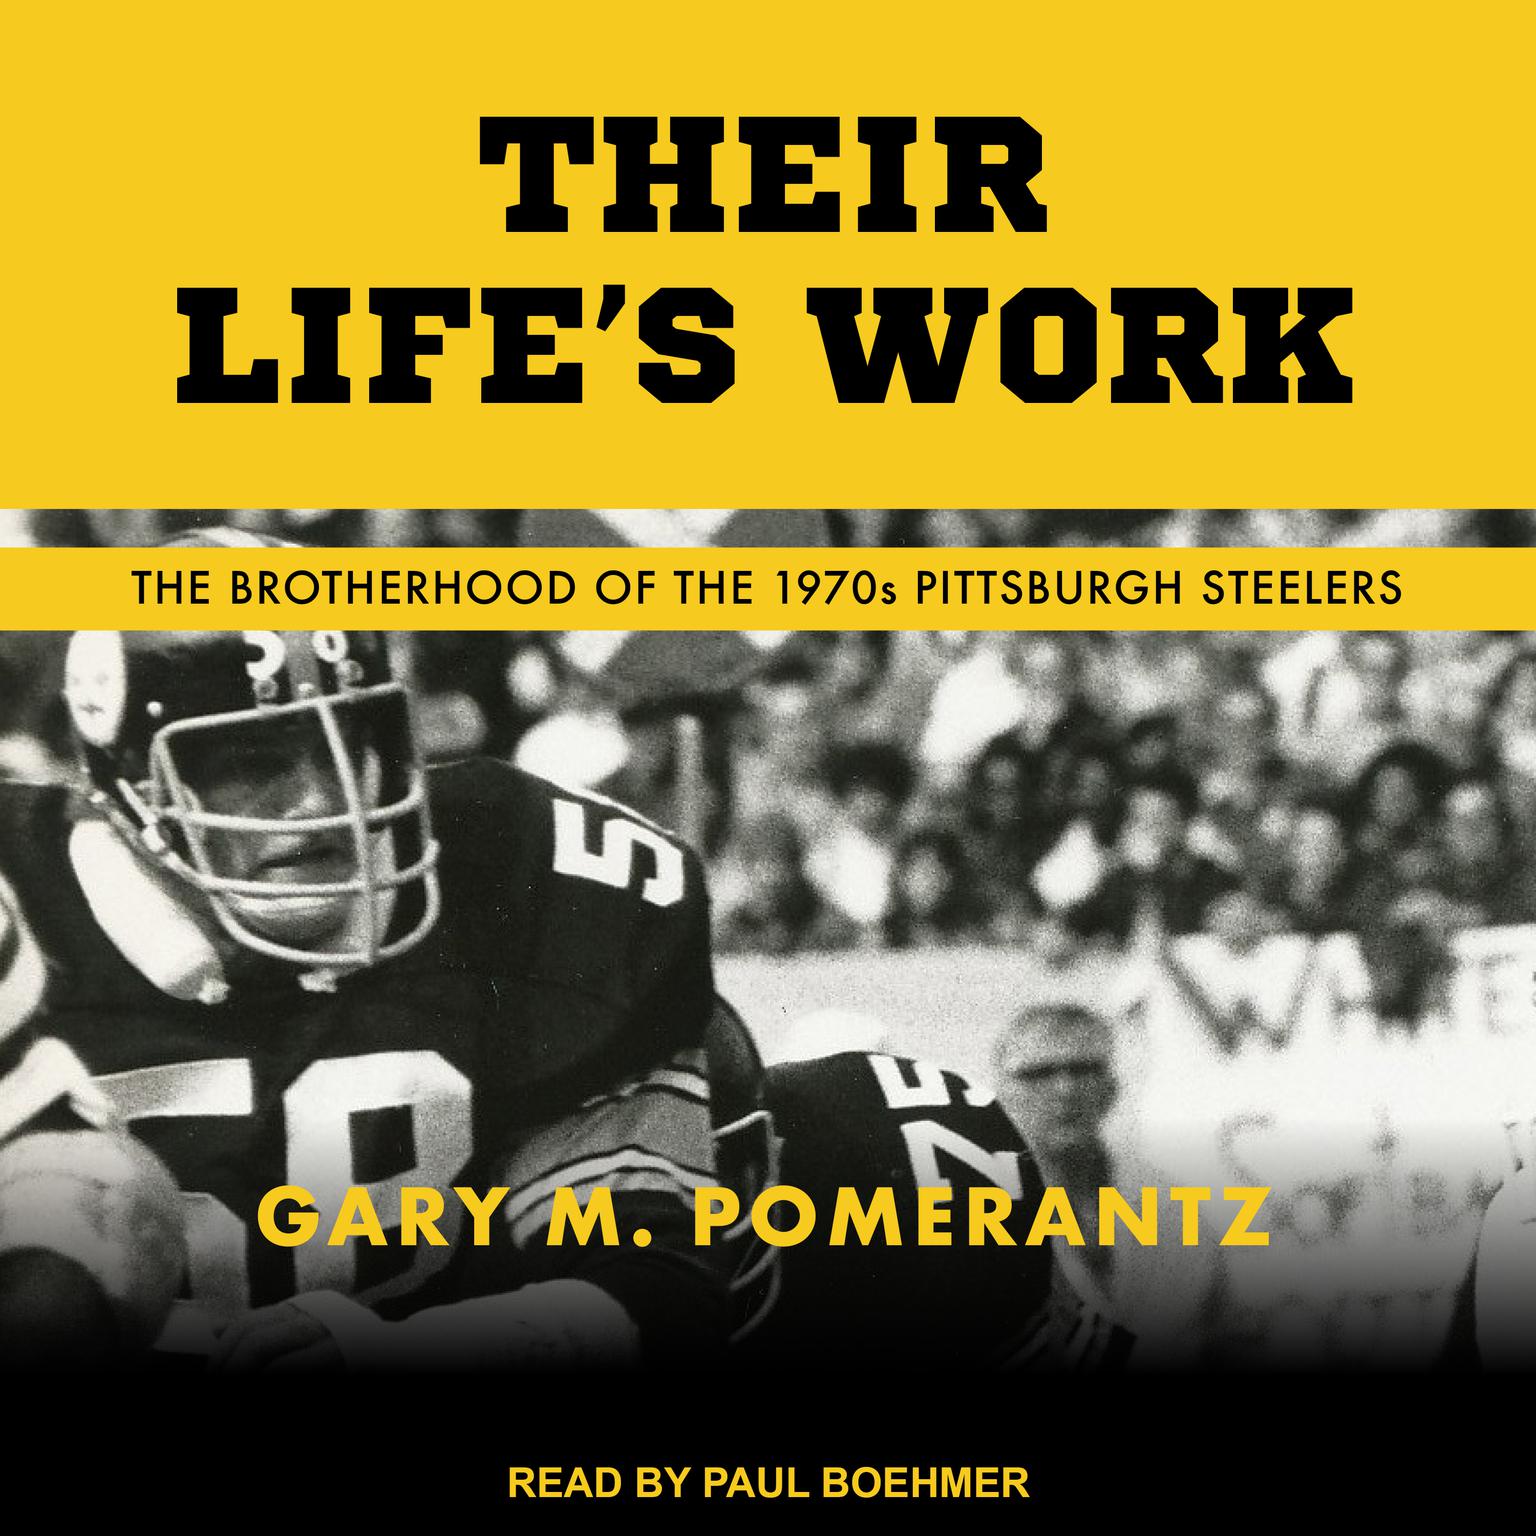 Their Lifes Work: The Brotherhood of the 1970s Pittsburgh Steelers Audiobook, by Gary M. Pomerantz